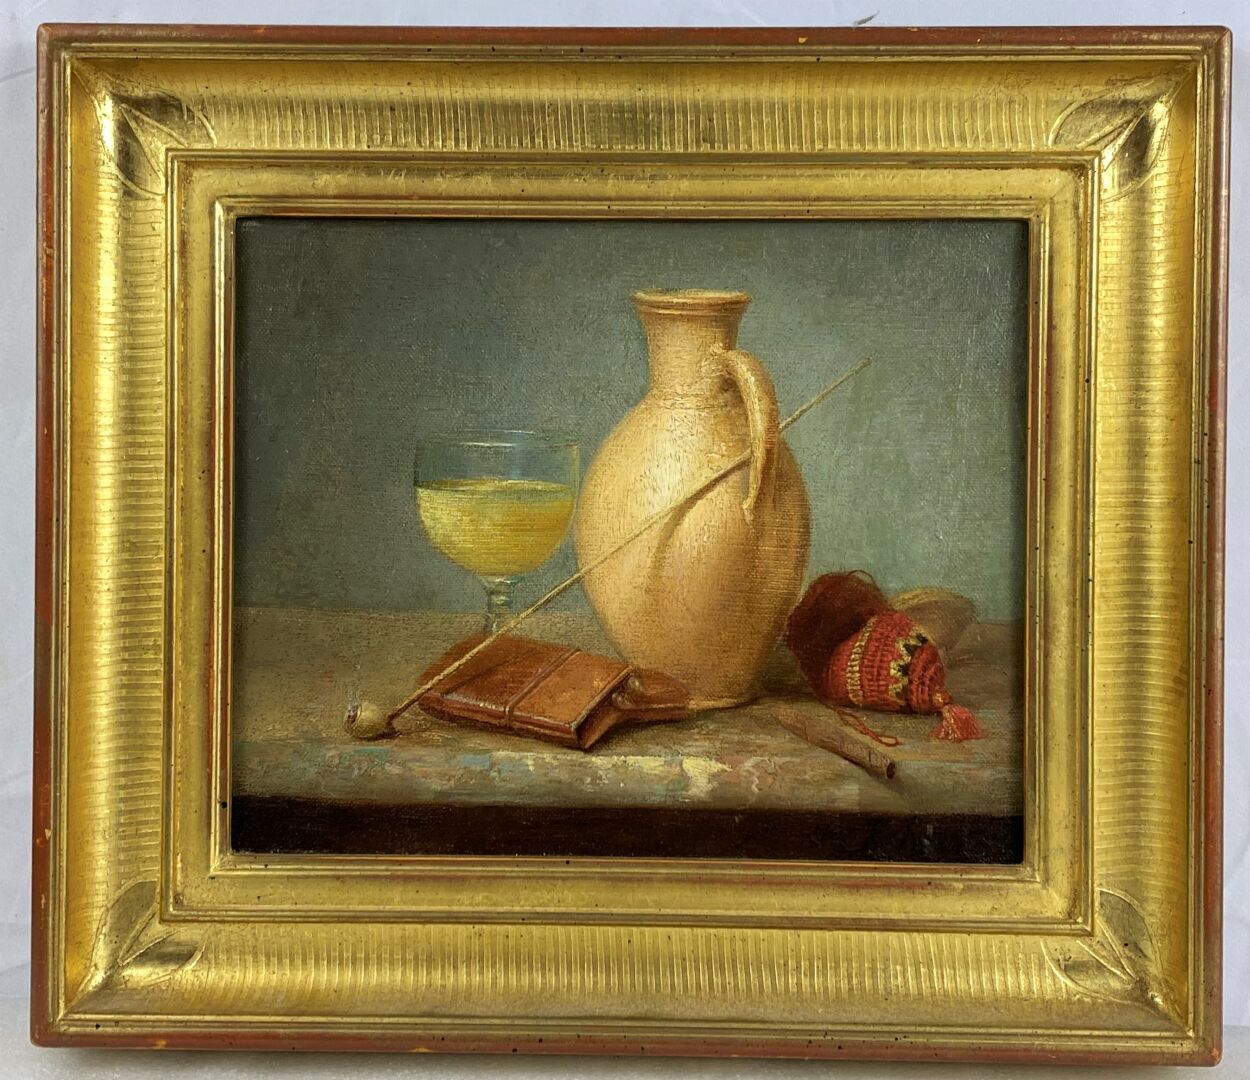 Null Eugene Joseph Racine (19th century),

Still life with pitcher, glass and pi&hellip;